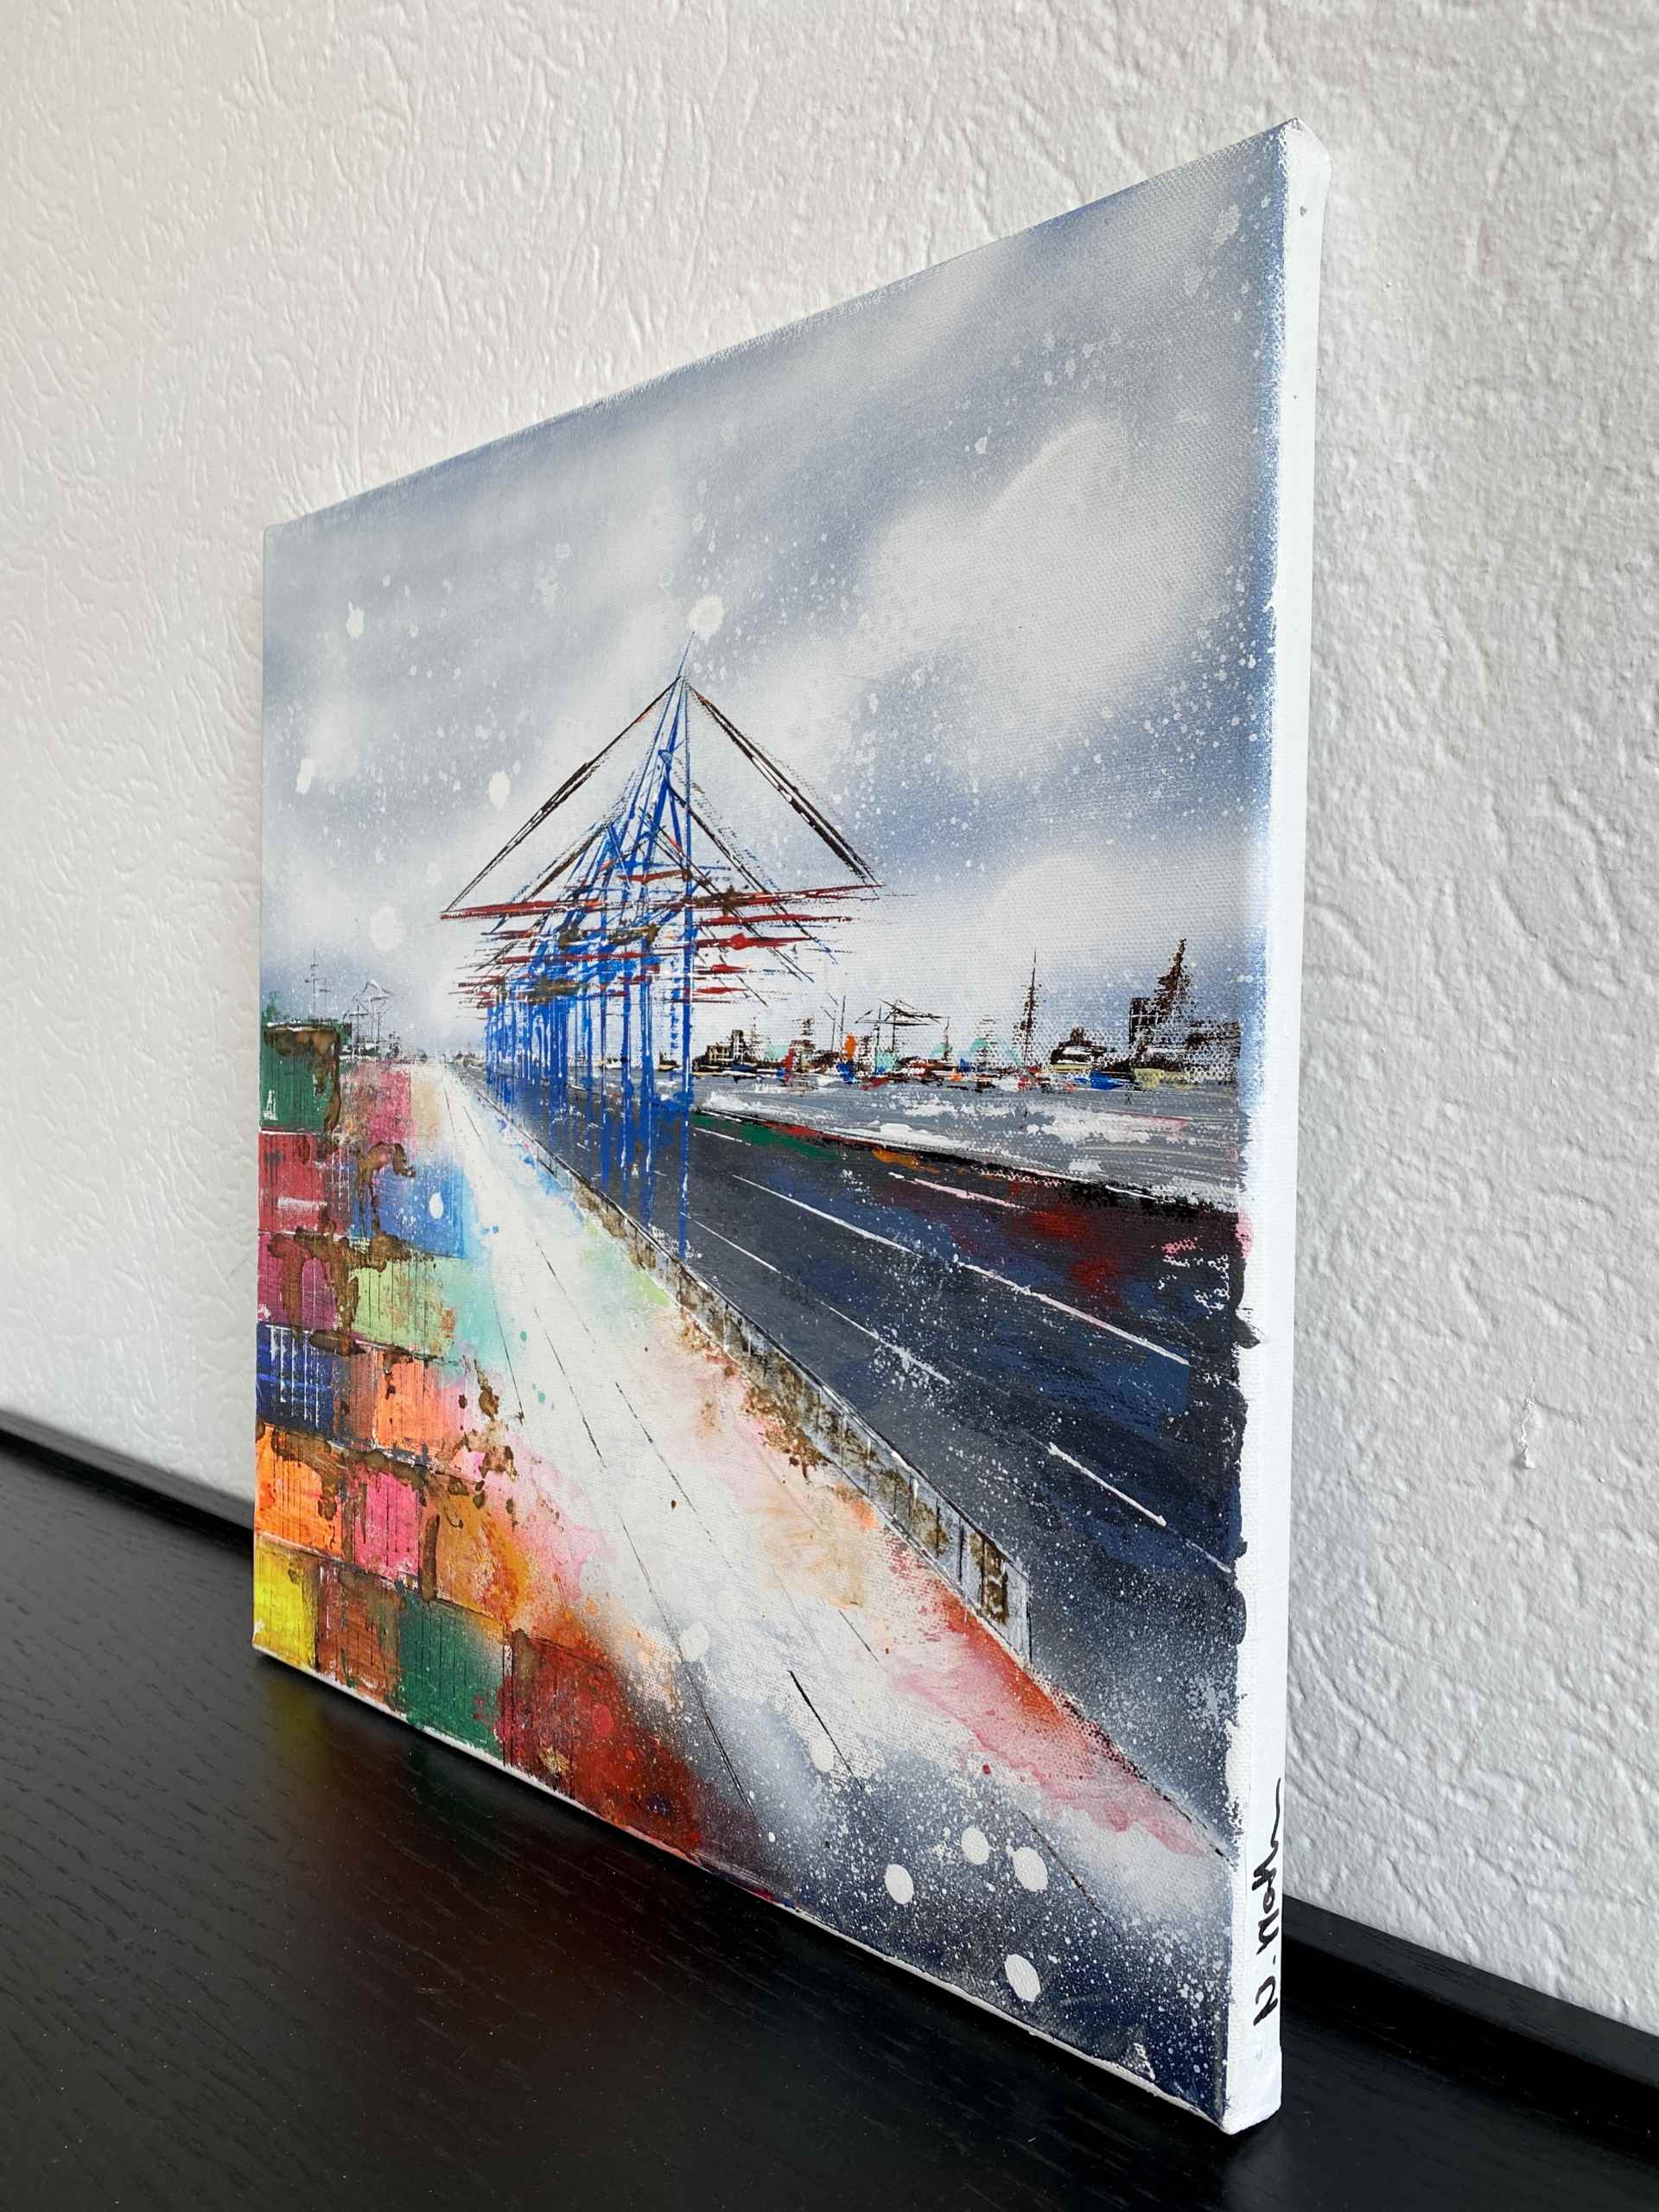 Side view of artwork "Dock No 6" by Nina Groth